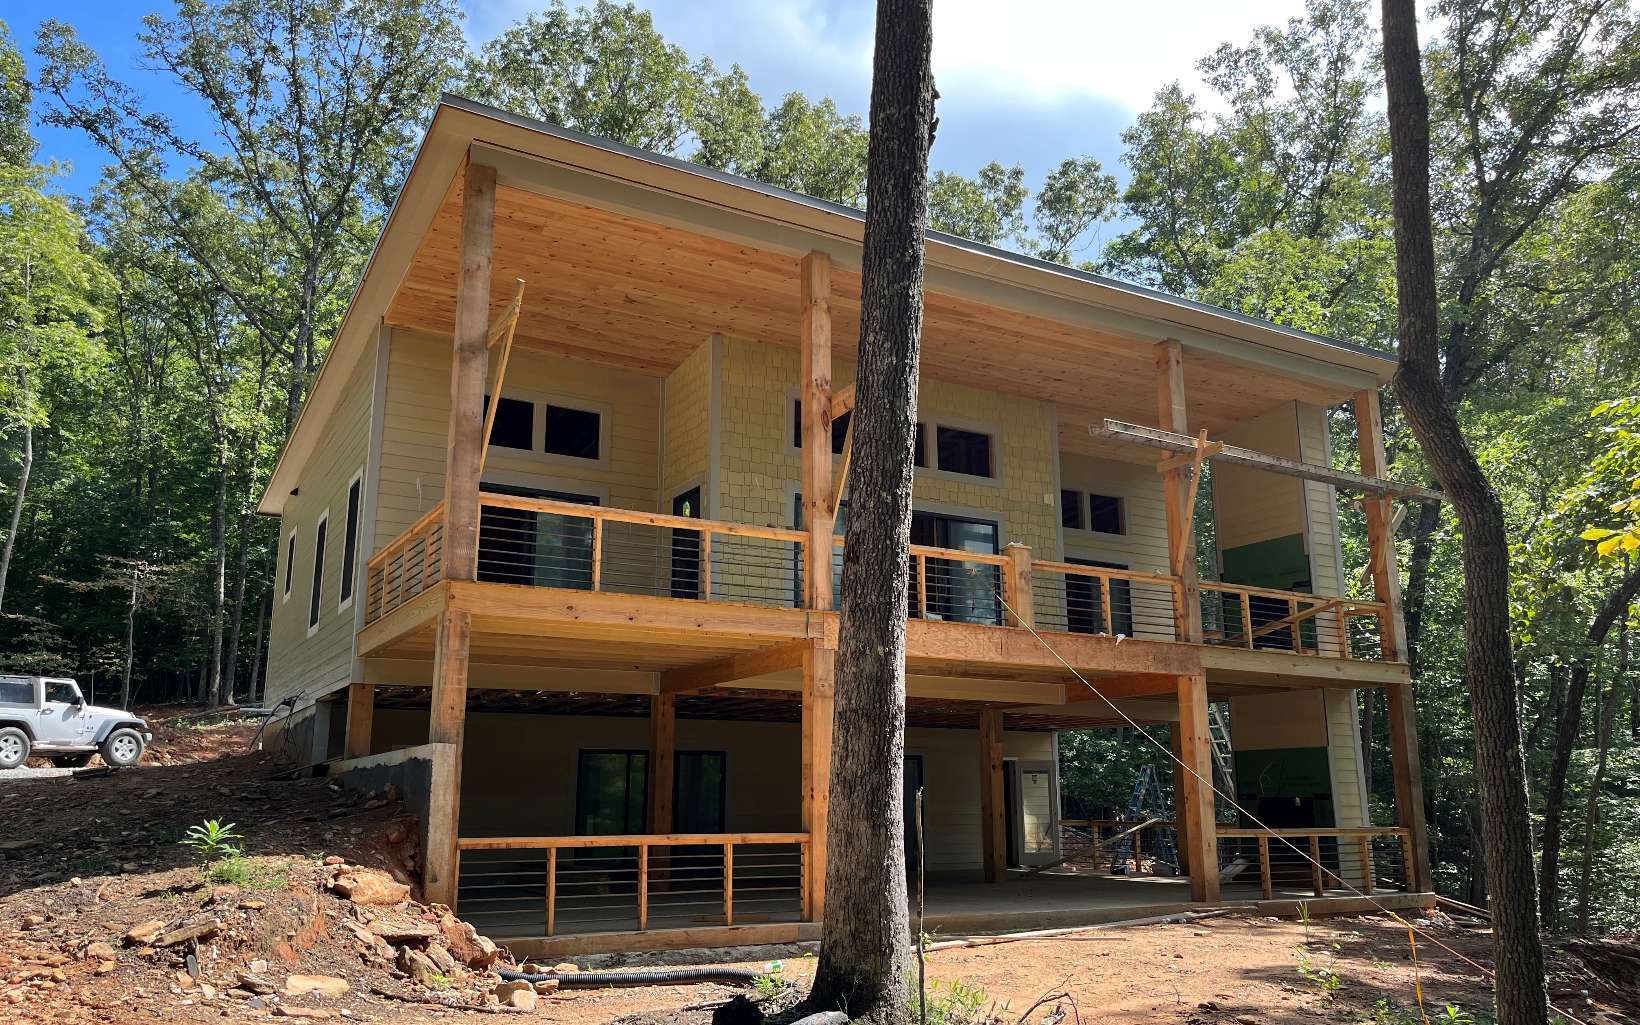 Modern mountain living... Searching for that new contemporary plan but haven't found a location that you just love quite yet? Well, look no further. This location is hard to beat! Not only is just minutes from both Blue Ridge & McCaysville, but it’s just a stone's throw from the Toccoa River, too! This new construction will offer the latest stylish finishes, master suite on the main, spacious living area with open floor plan, multiple fireplaces inside and out, and two levels of living.Located in the highly sought after Toccoa Riverbend Estates, this community offers lots of privacy and a beautiful waterside common area on the Toccoa River so you can enjoy kayaking, tubing, and fly fishing on some of the best trophy trout waters in the state of Georgia. Make your way to this masterpiece in the making…